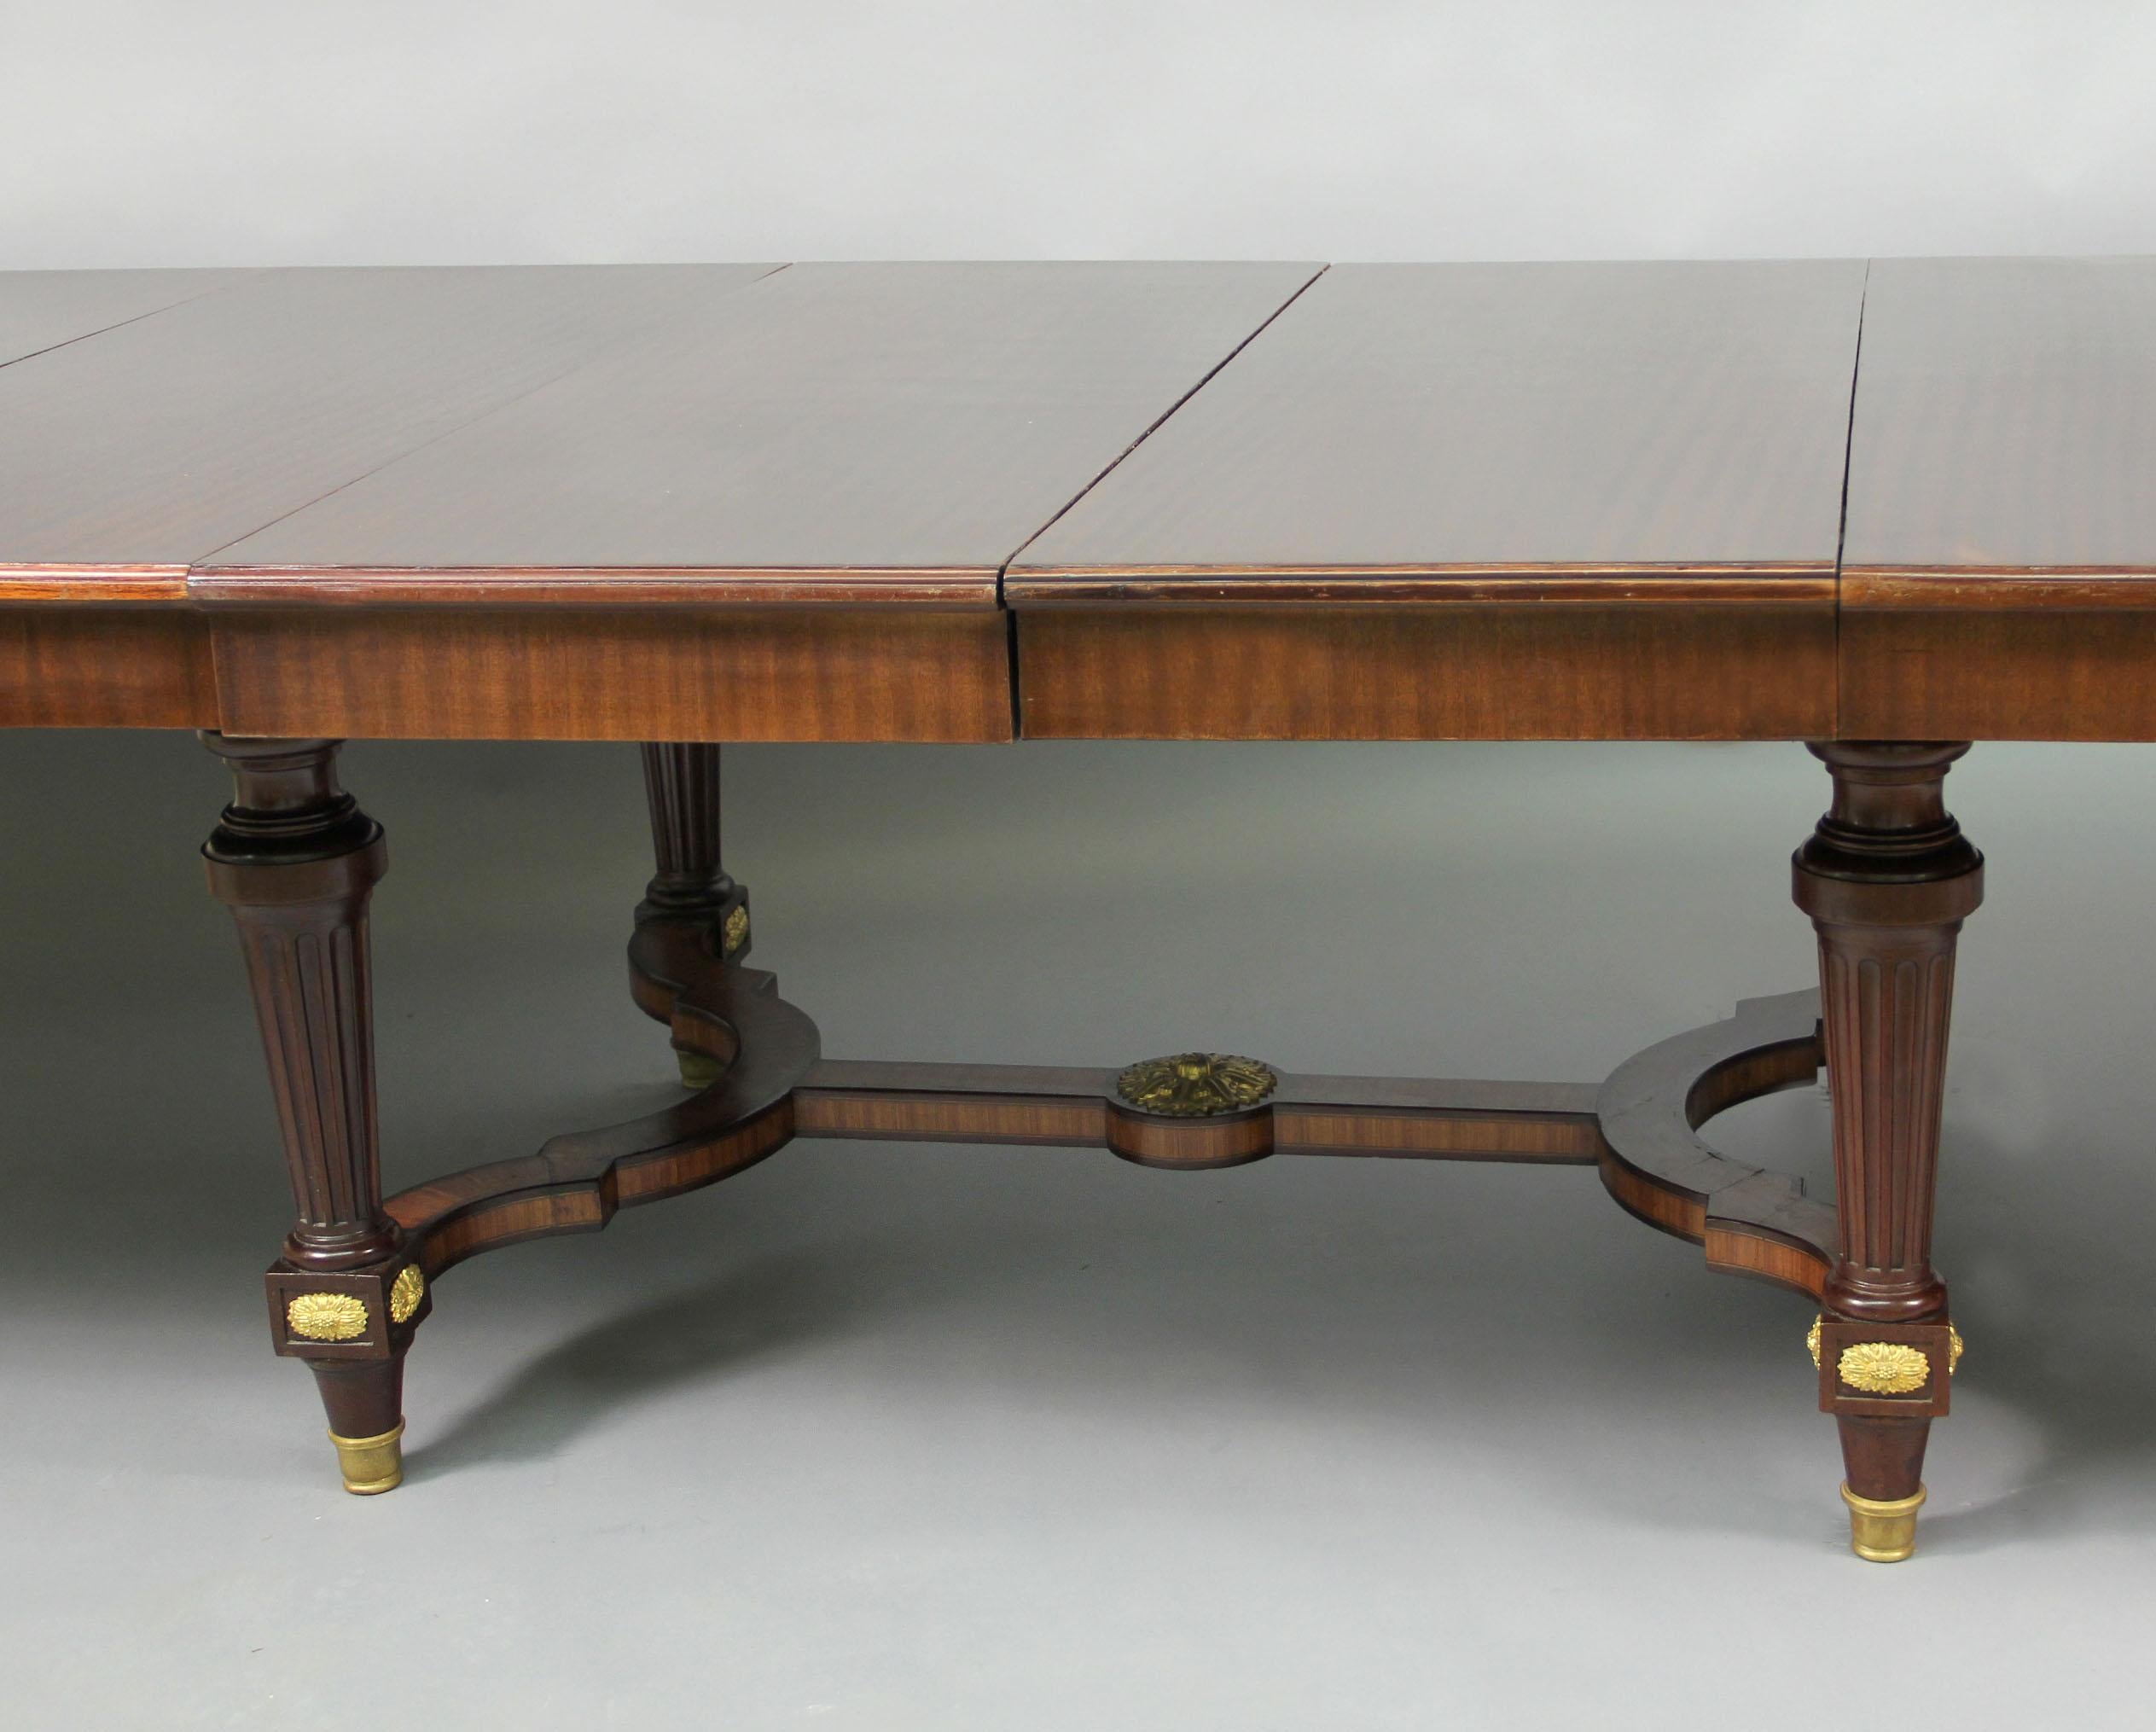 Belle Époque Beautiful Late 19th Century Gilt Bronze Mounted Louis XVI Style Dining Table For Sale